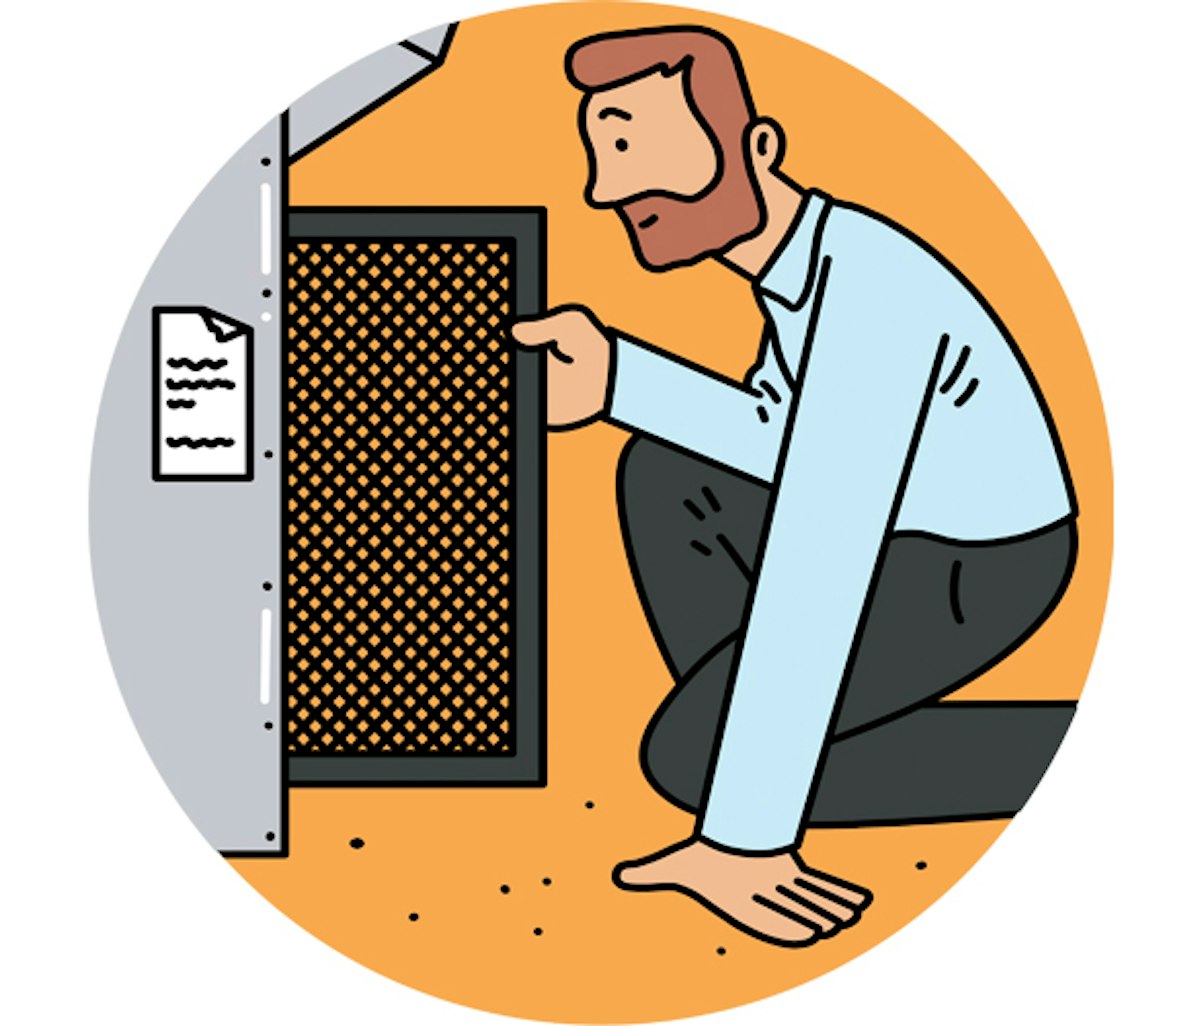 An illustration of a man inspecting an air conditioner.